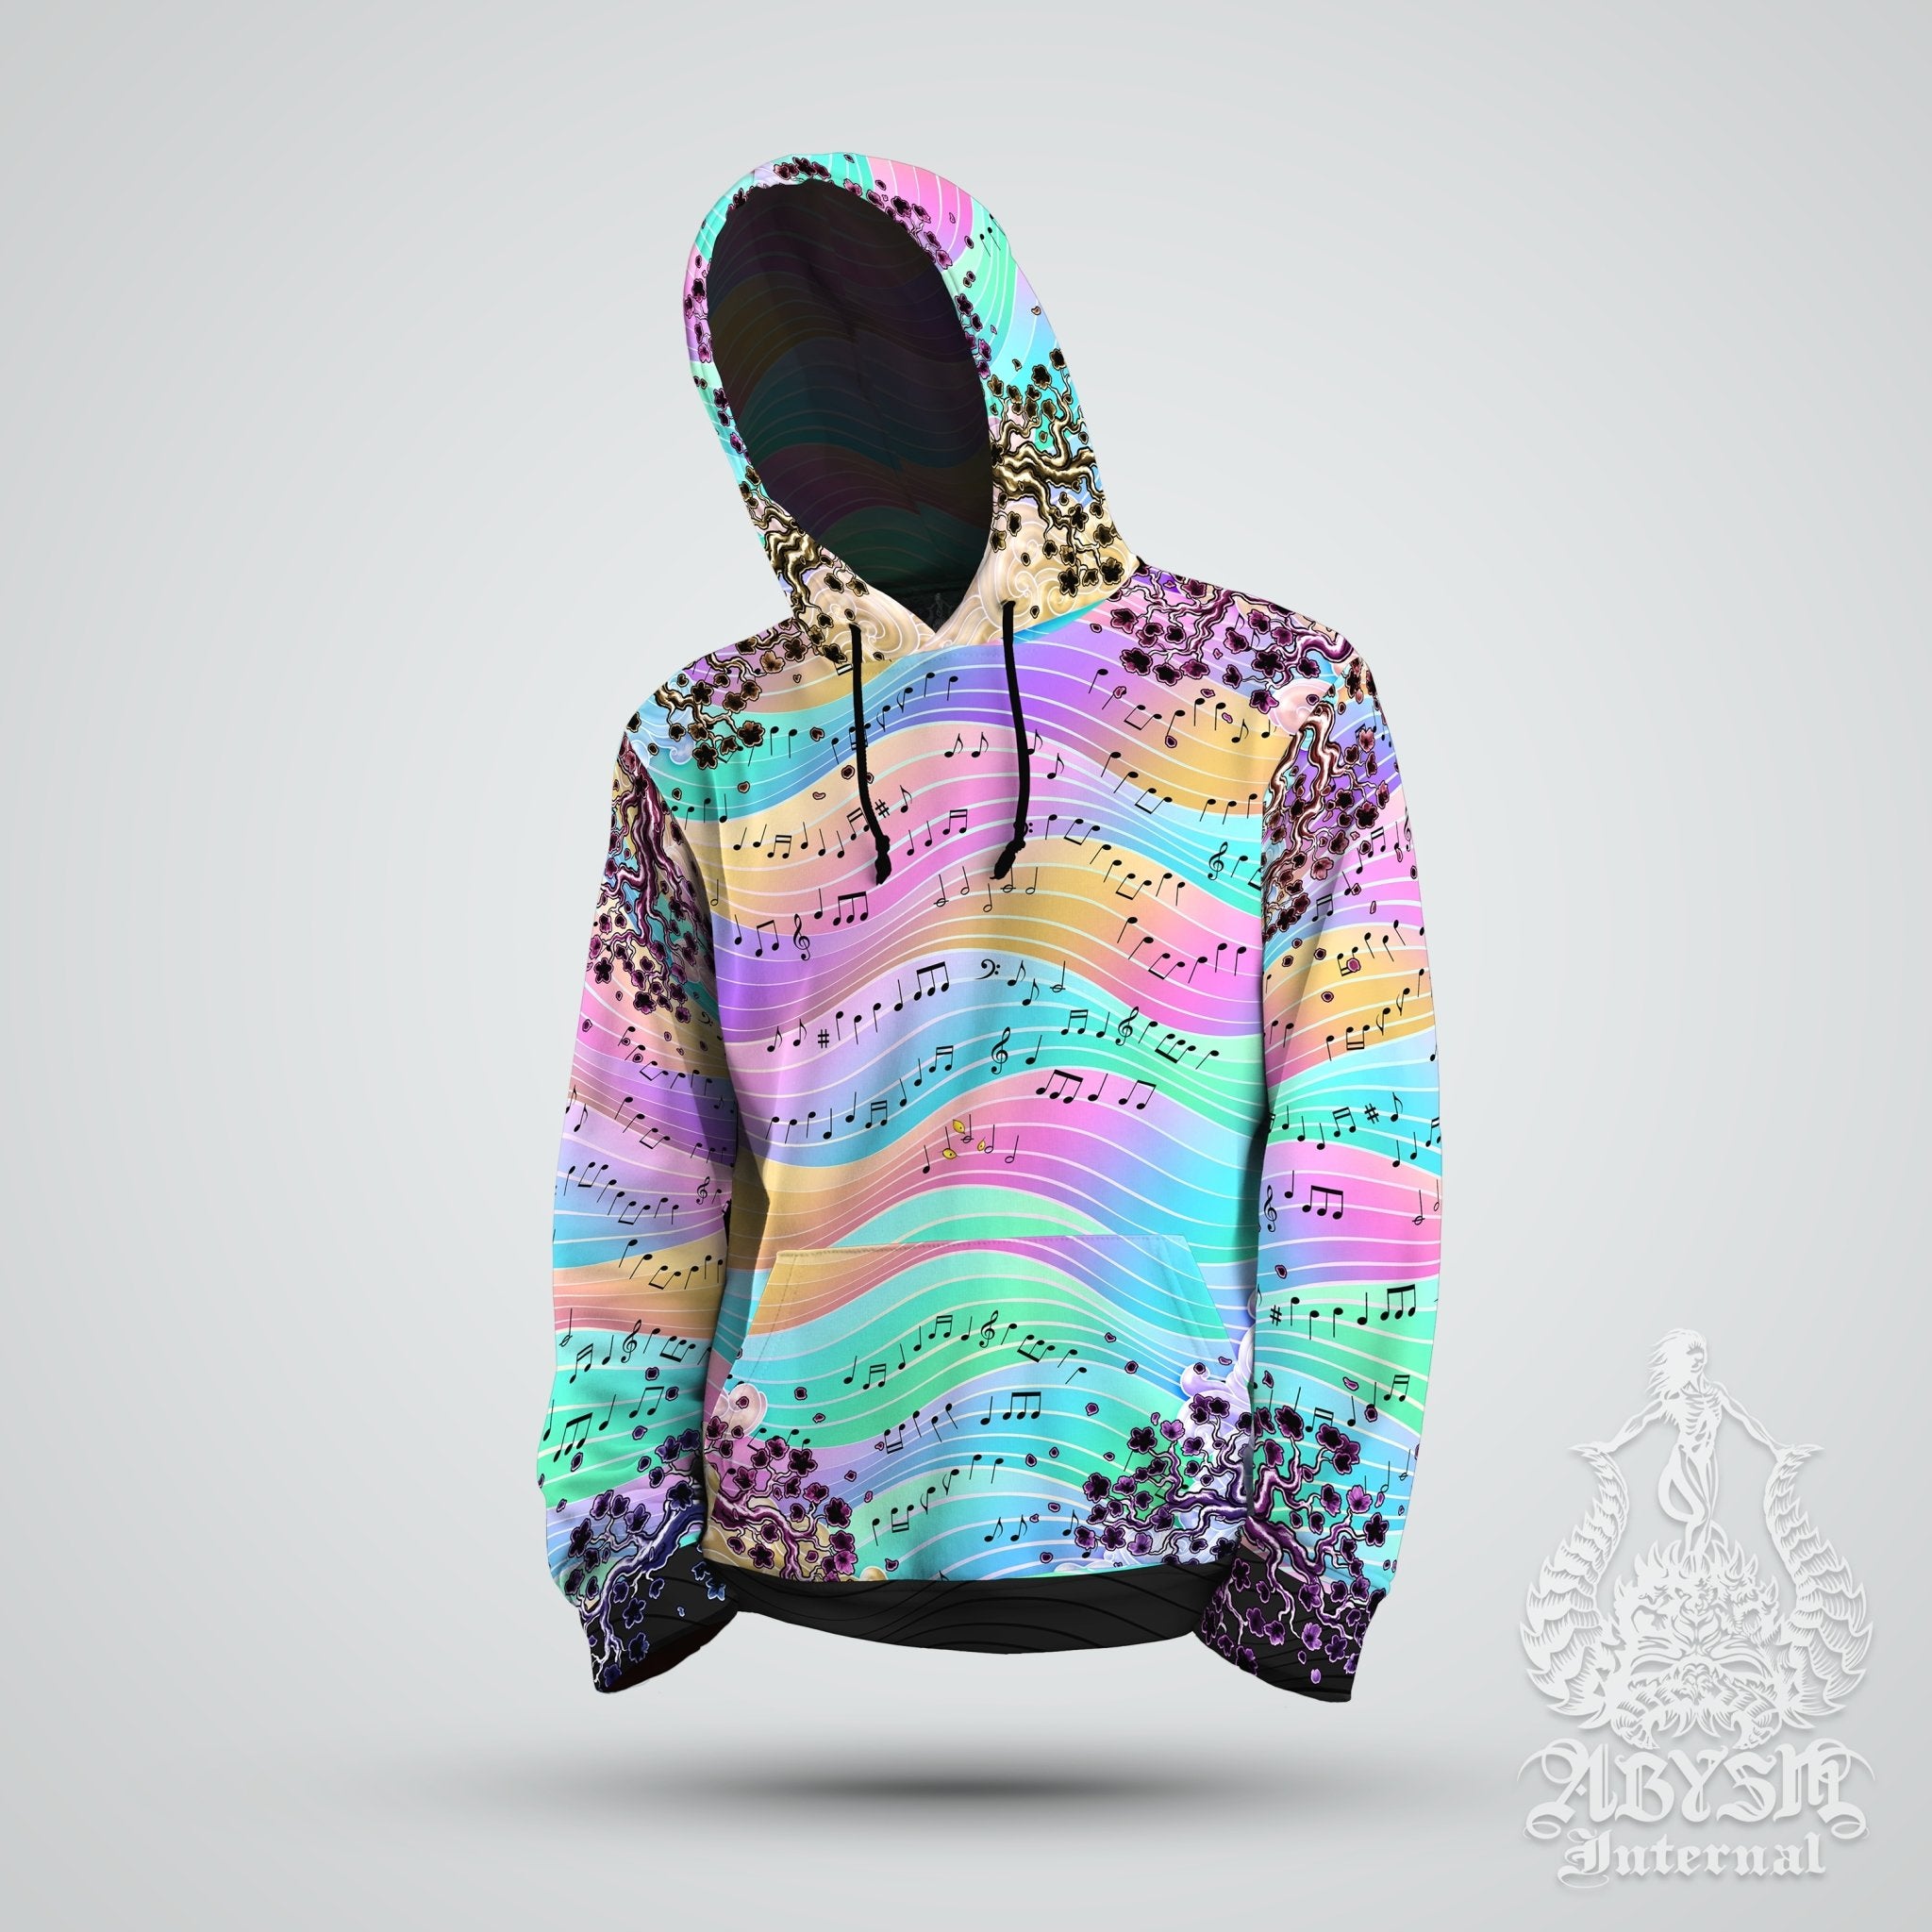 Pastel Hoodie, Aesthetic Streetwear, Rave Outfit, Music Festival, Trippy Sweater, Holographic Clothing, Unisex - Black Dragon, Treble Clef - Abysm Internal